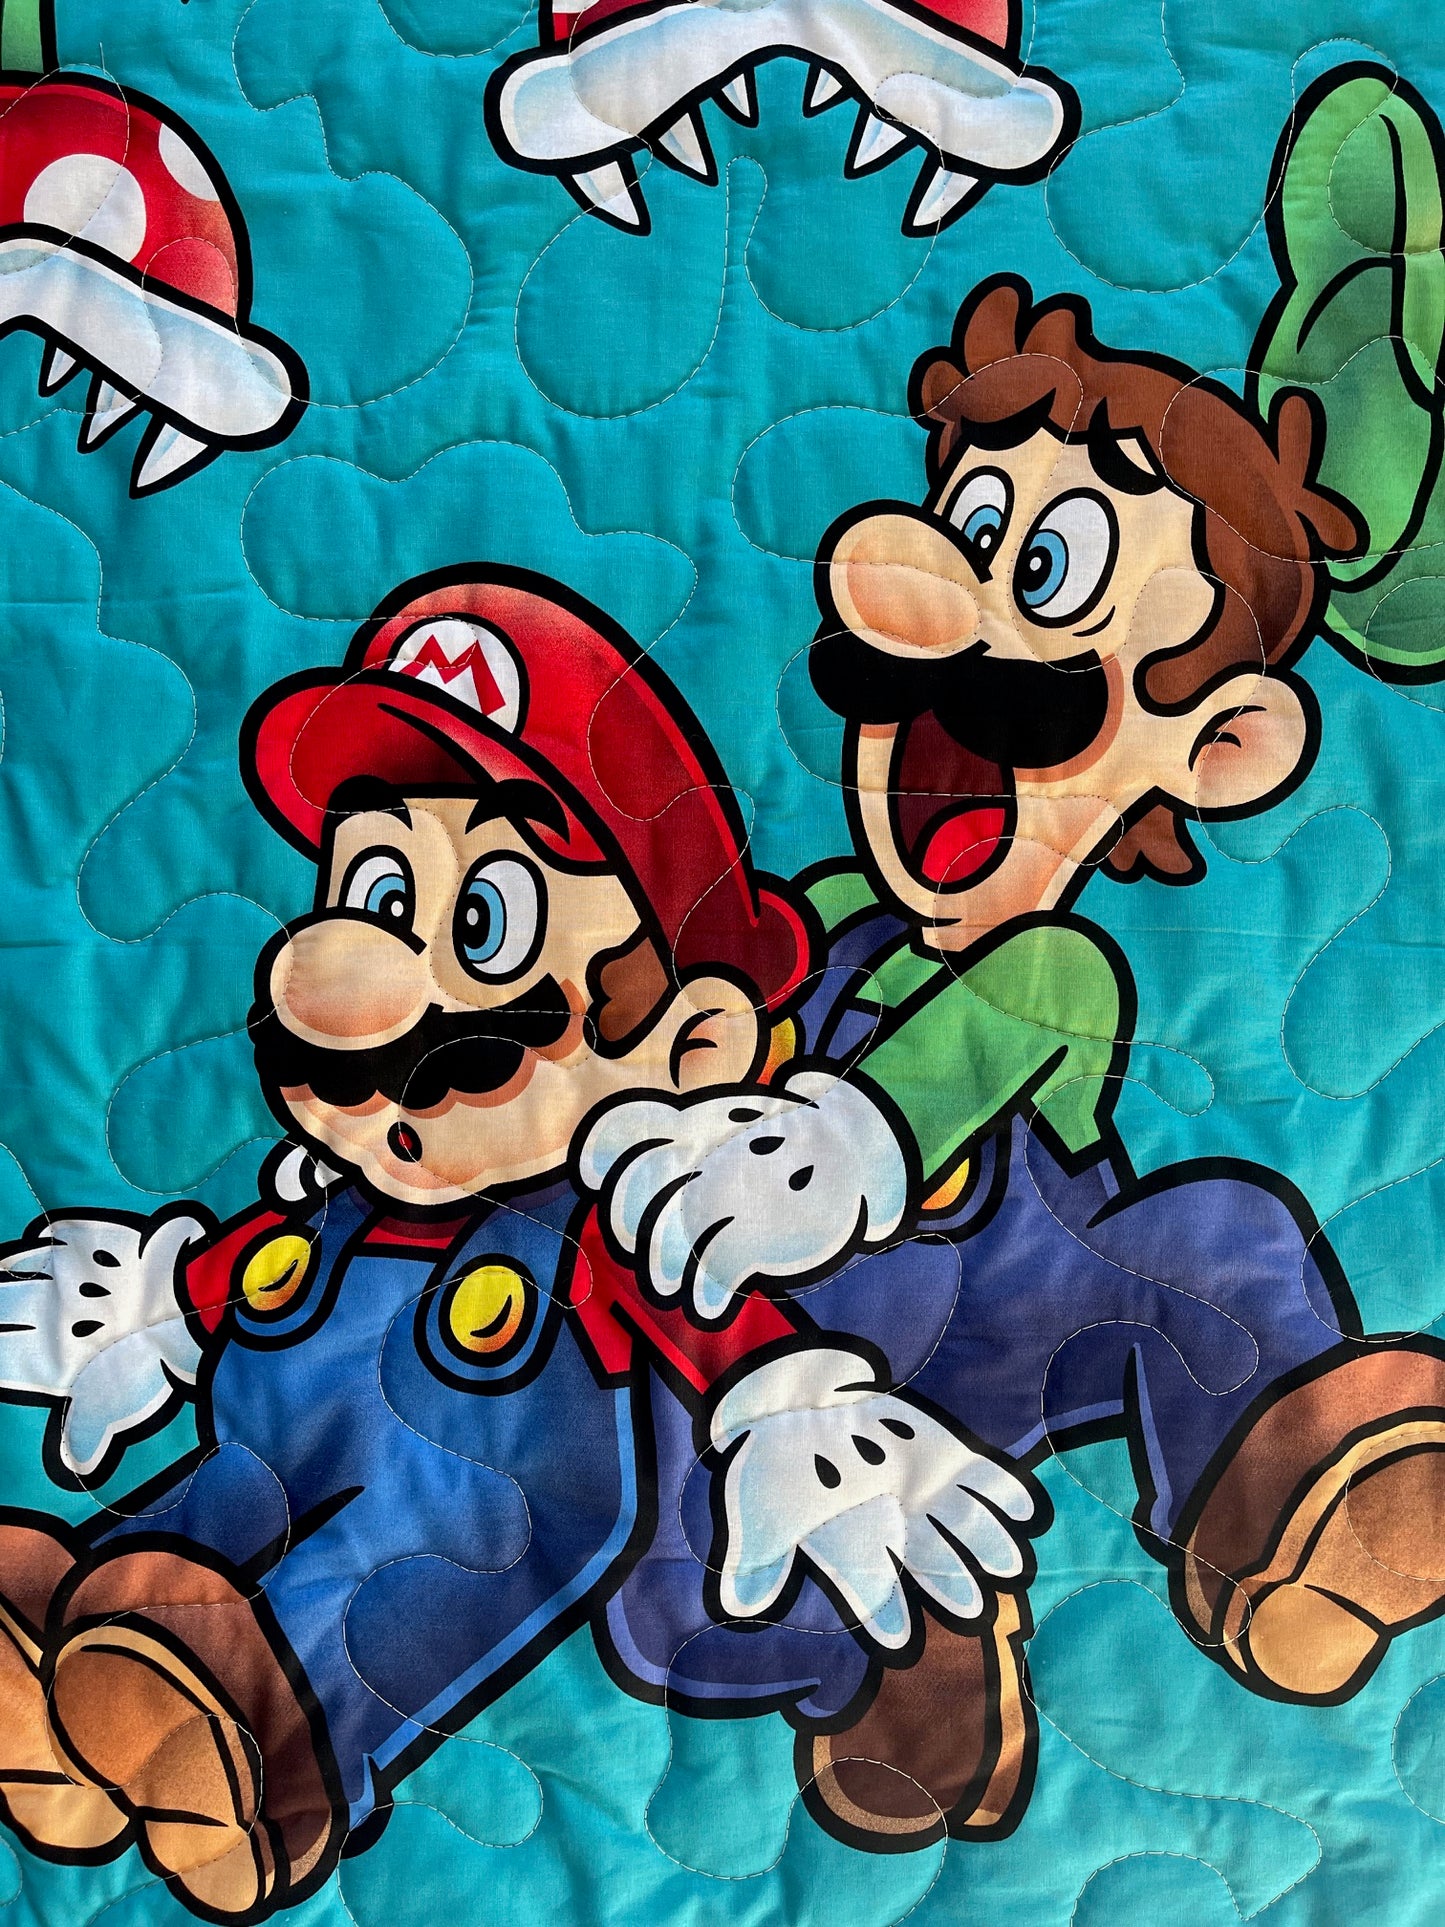 NINTENDO SUPER MARIO BROTHERS VIDEO GAME MARIO AND LUIGI INSPIRED QUILTED BLANKET